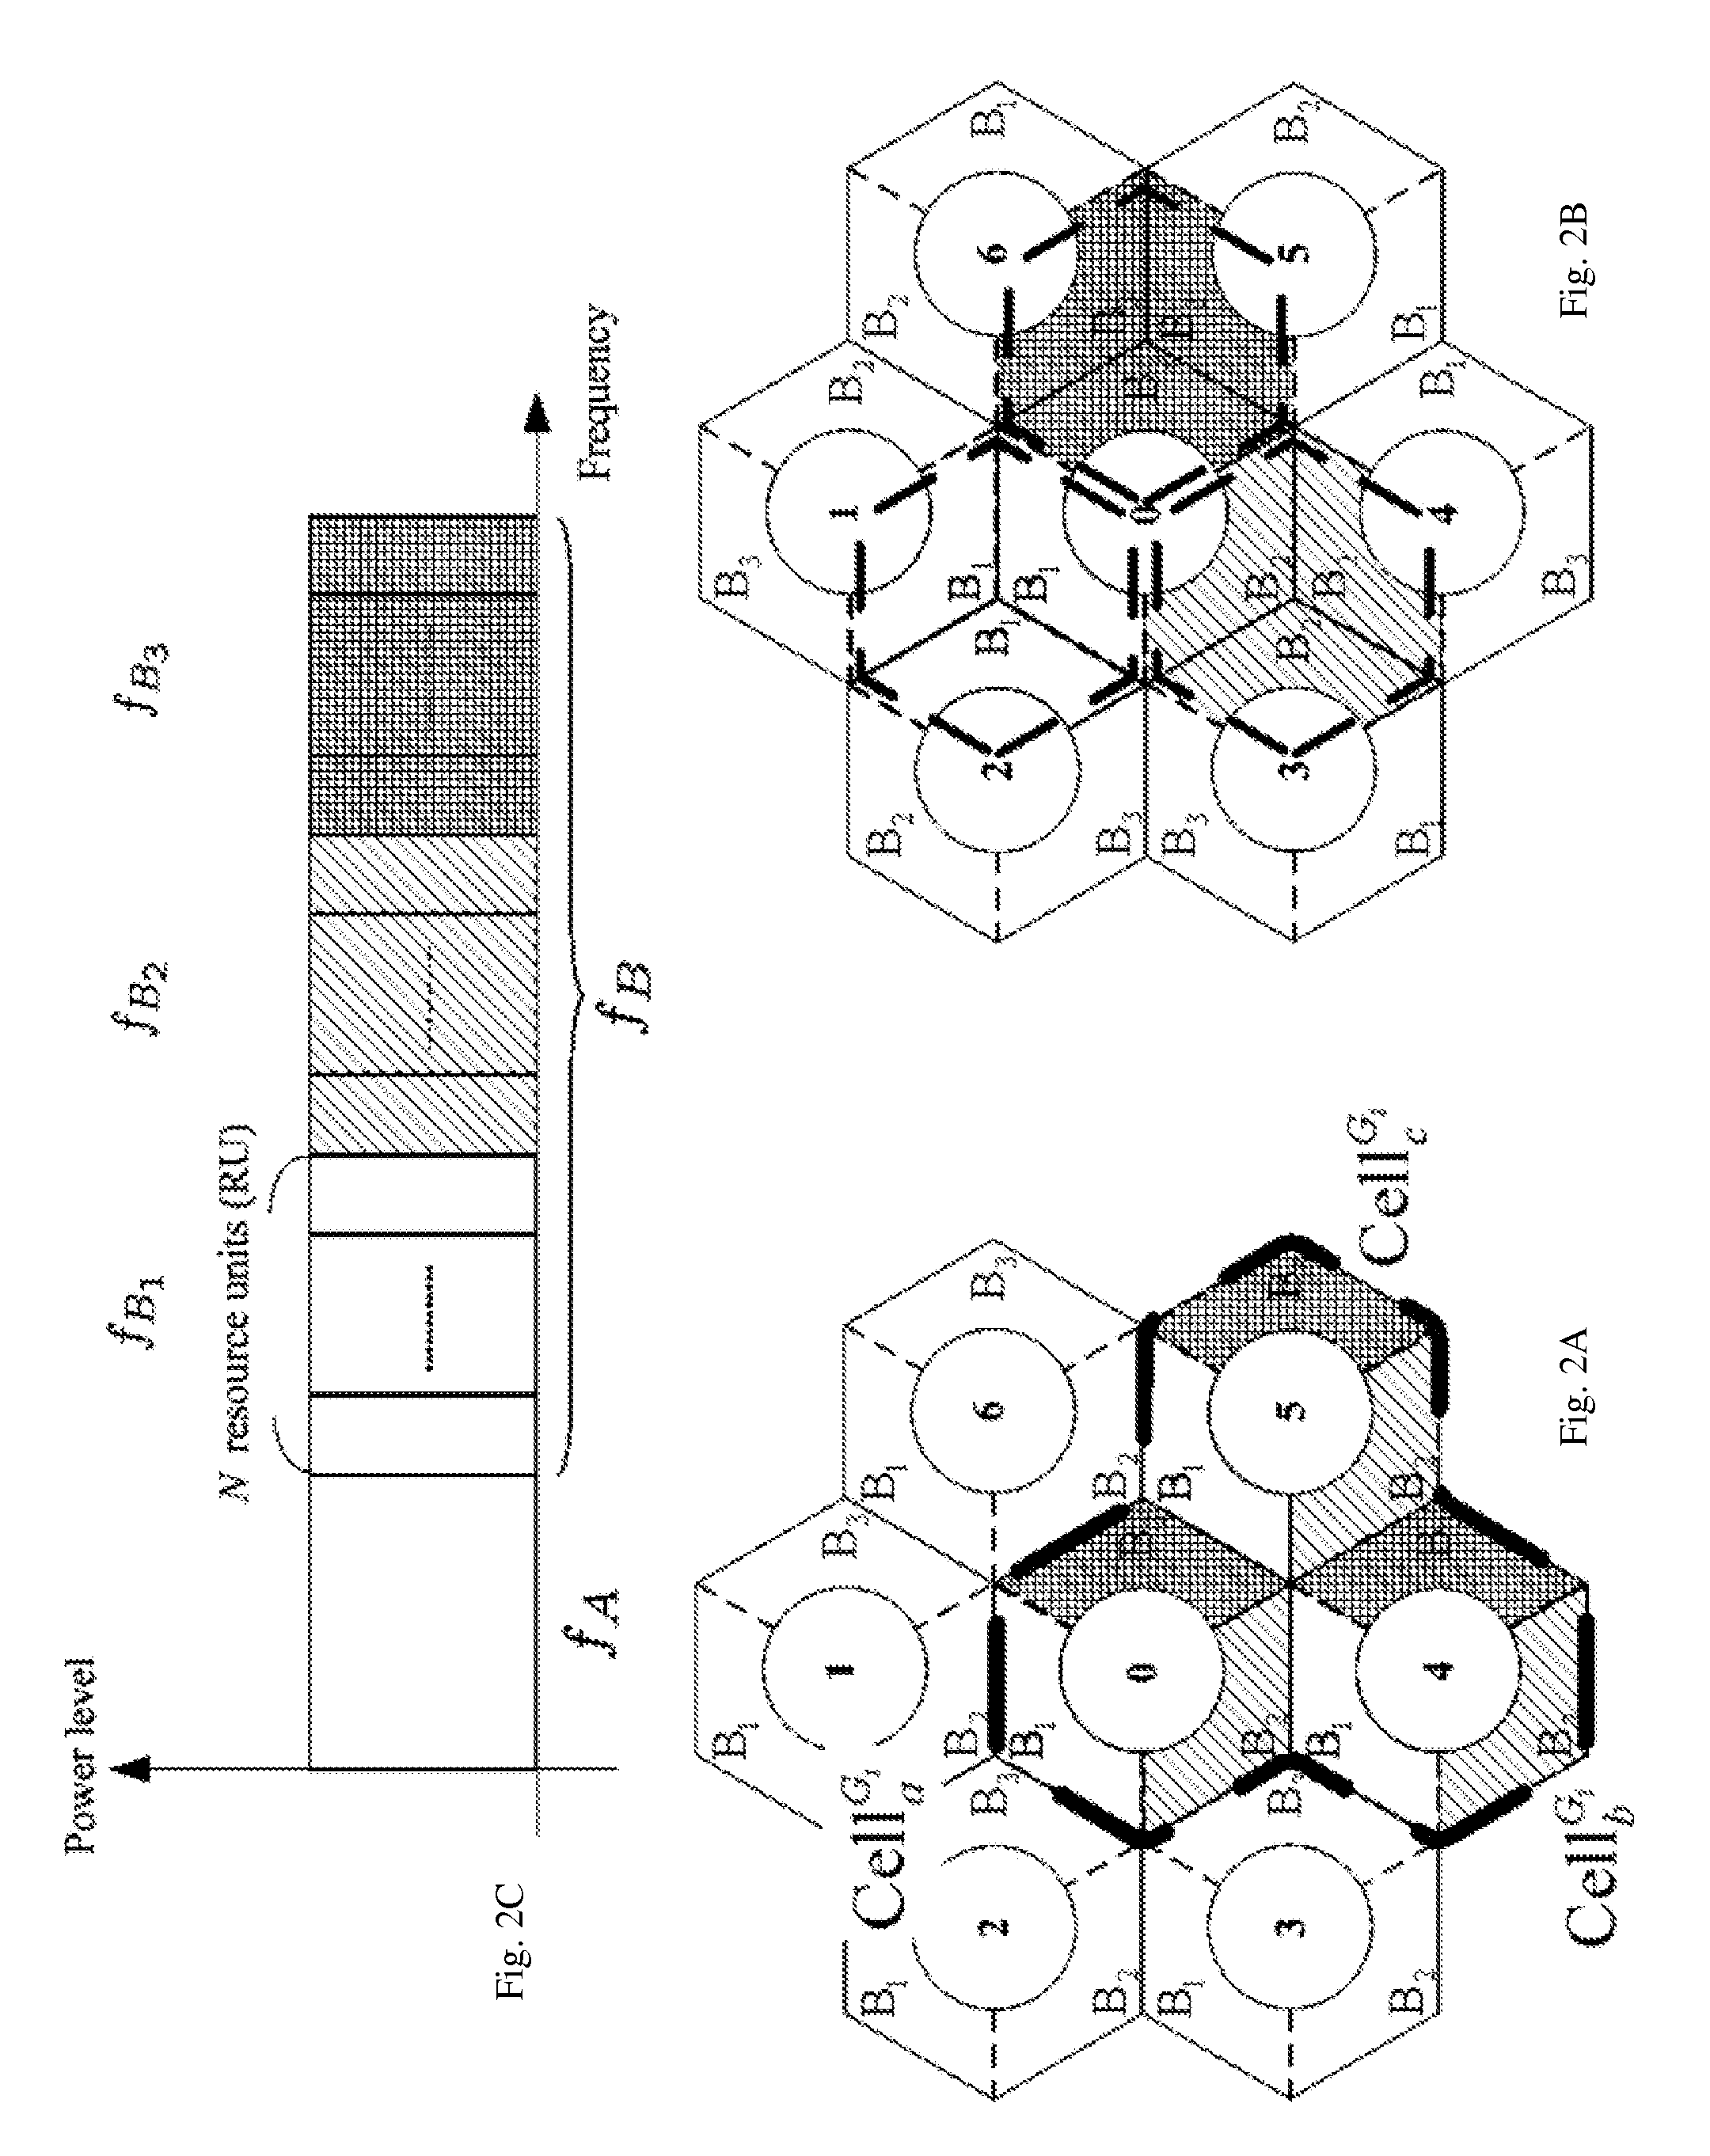 Method and apparatus for coordinated MIMO signal transmission among multiple cells in wireless OFDM systems